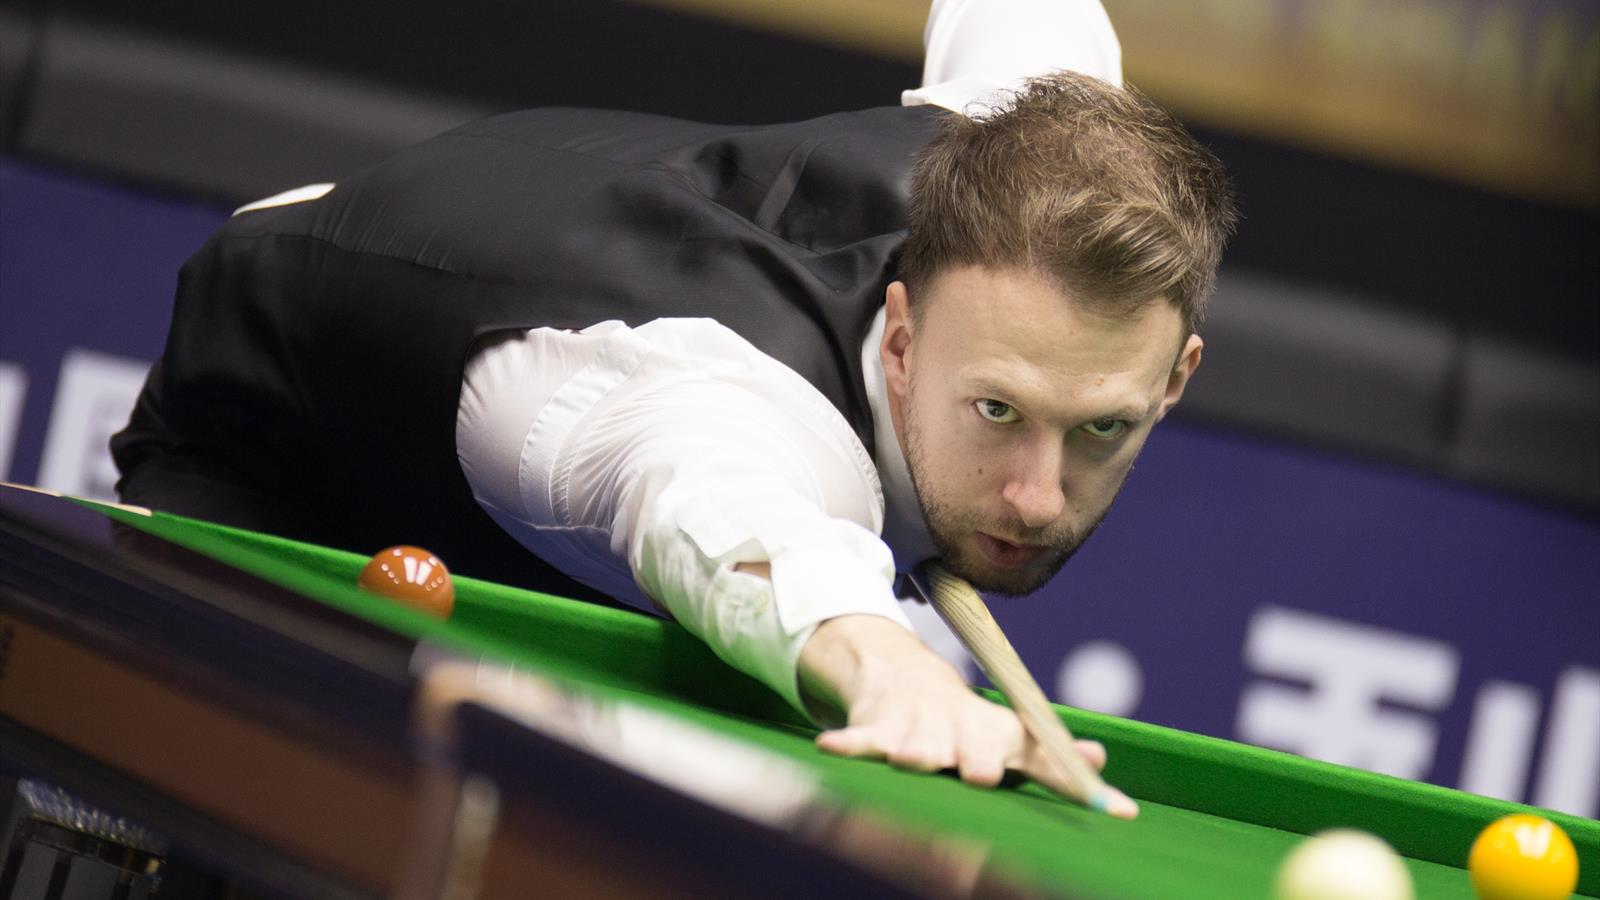 players championship snooker live stream